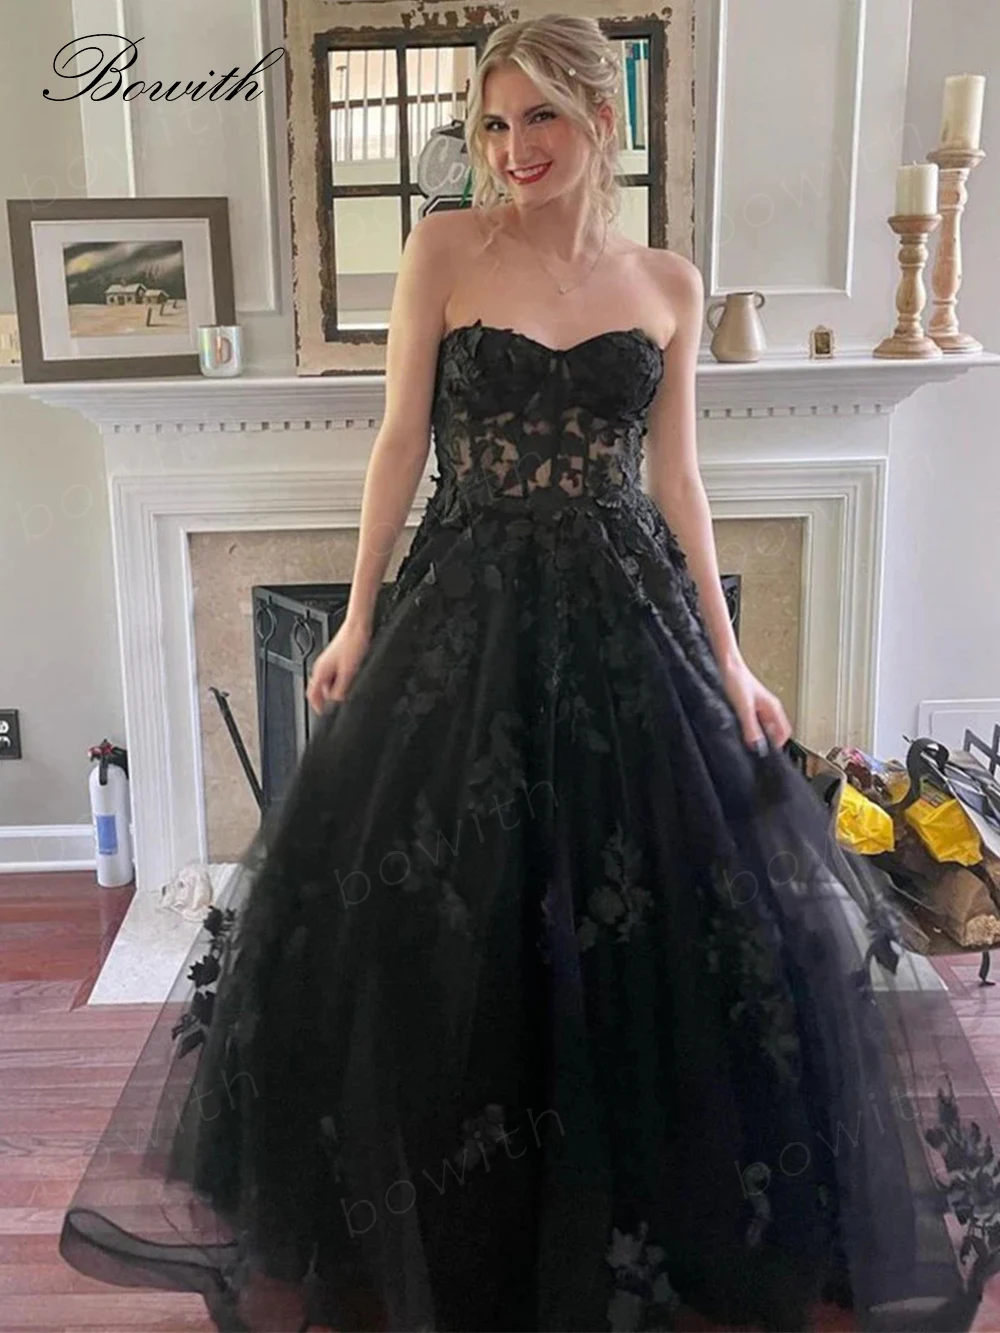 

Bowith Strapless Evening Dress with Applique A Line Black Prom Gown Formal Evening Dresses for Women Luxury Dress for Gala Party